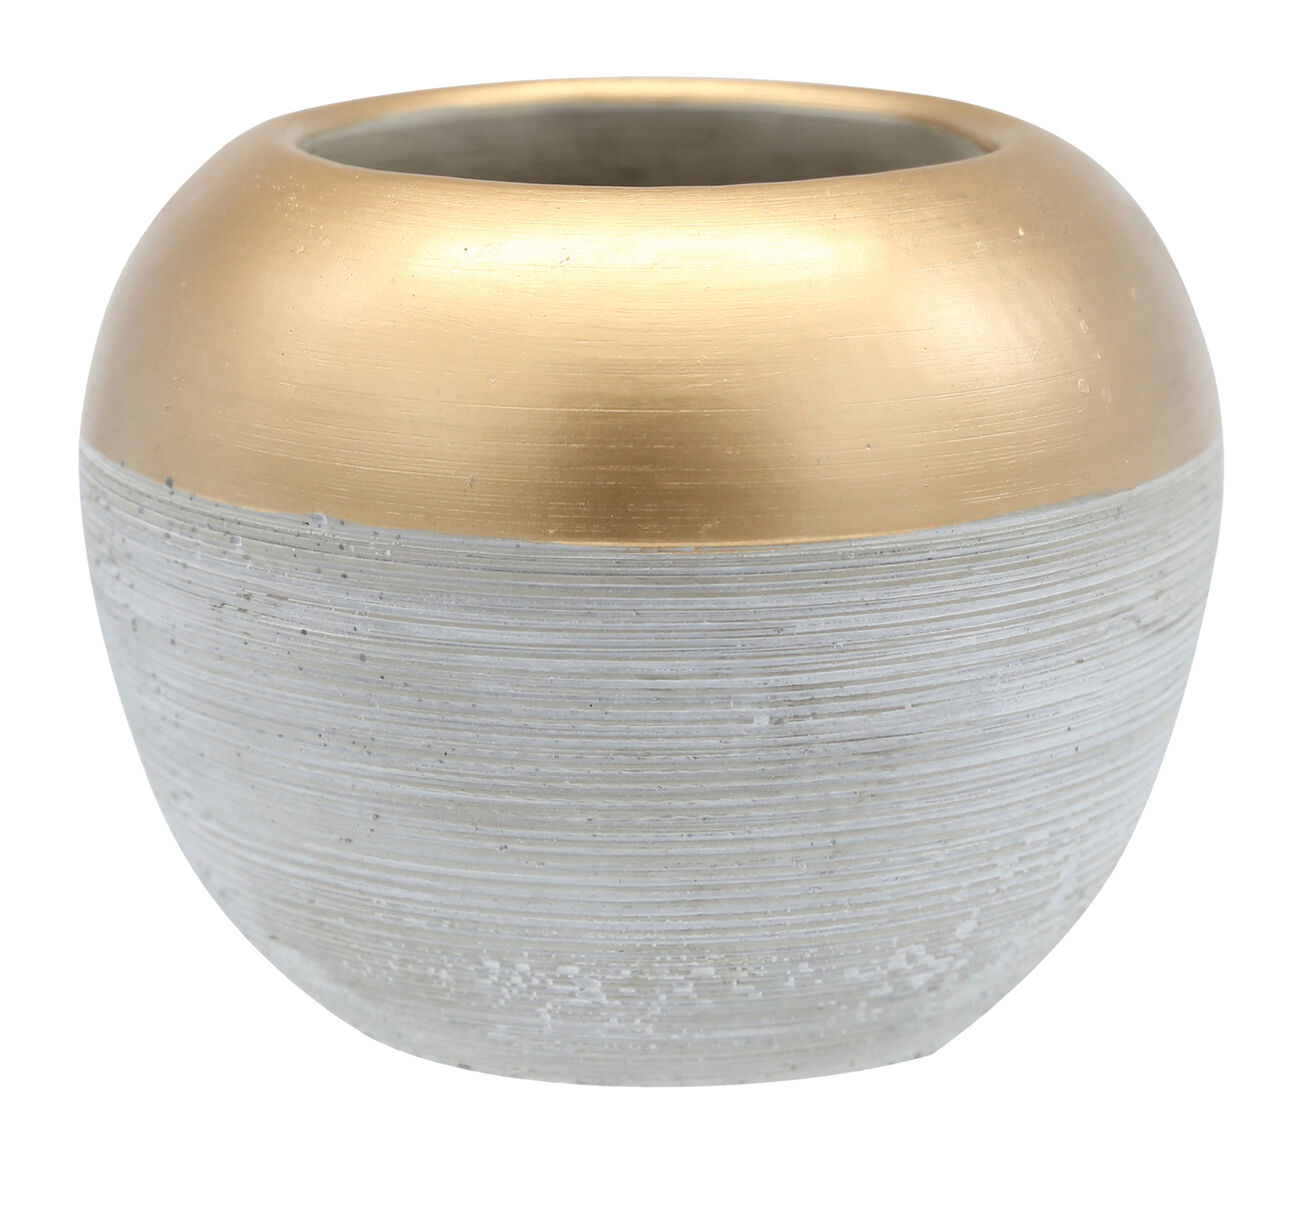 Cement Pot with Golden Top and Brushed Silver Body, Medium, Silver and Gold